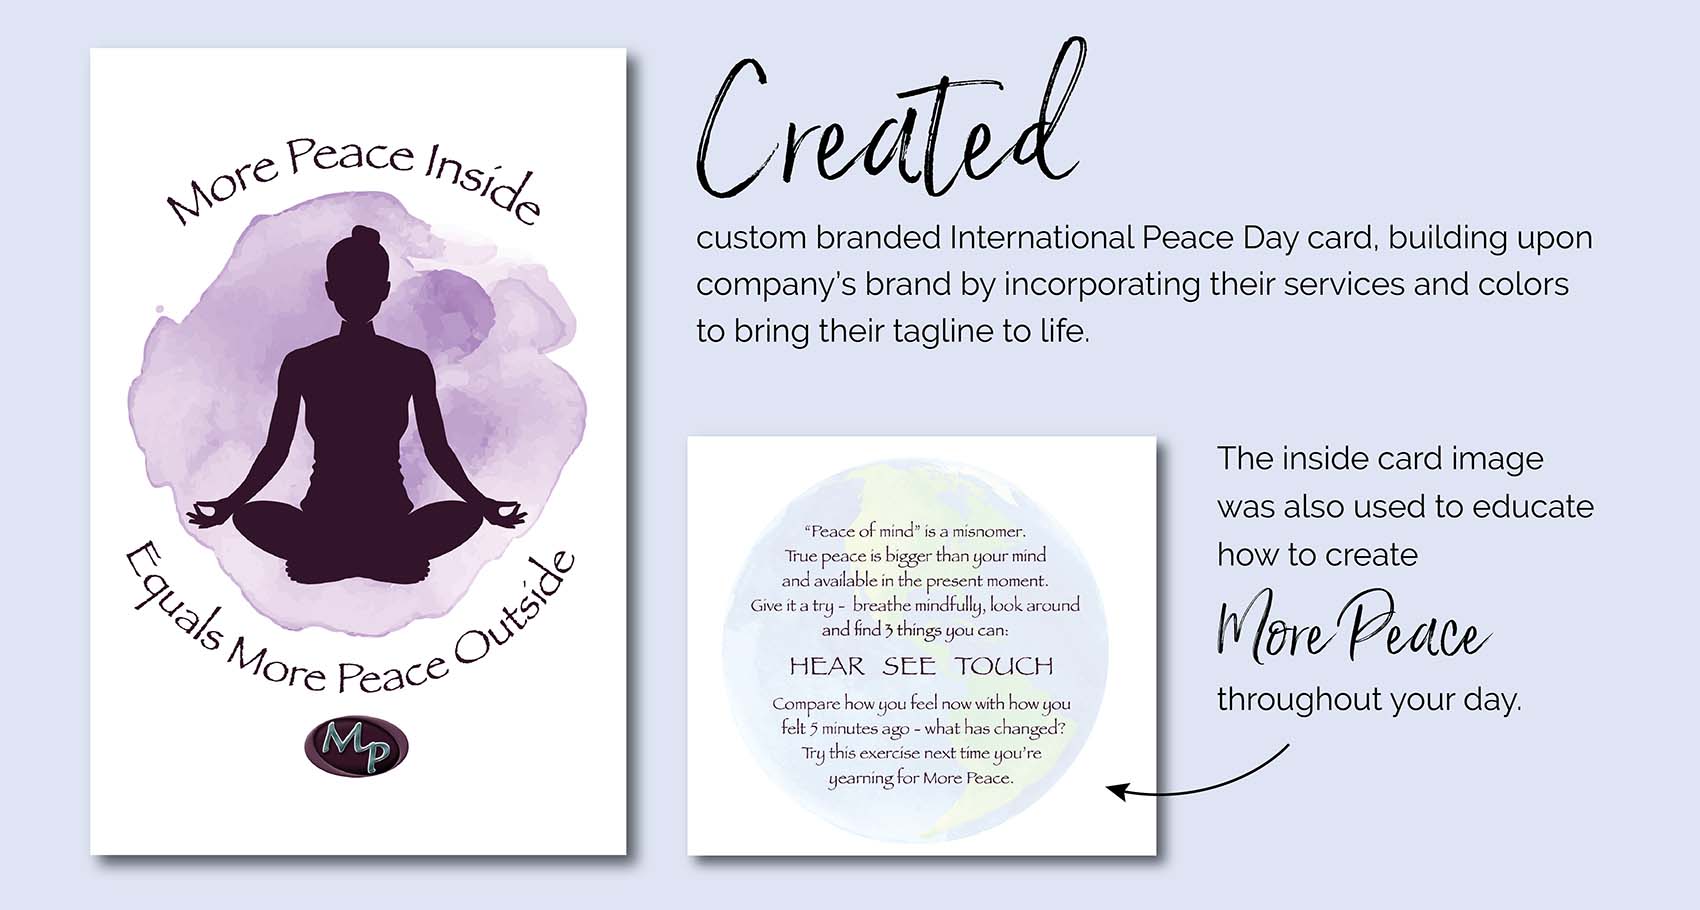 More Peace Inside Holiday Card Design by Eclectik Design